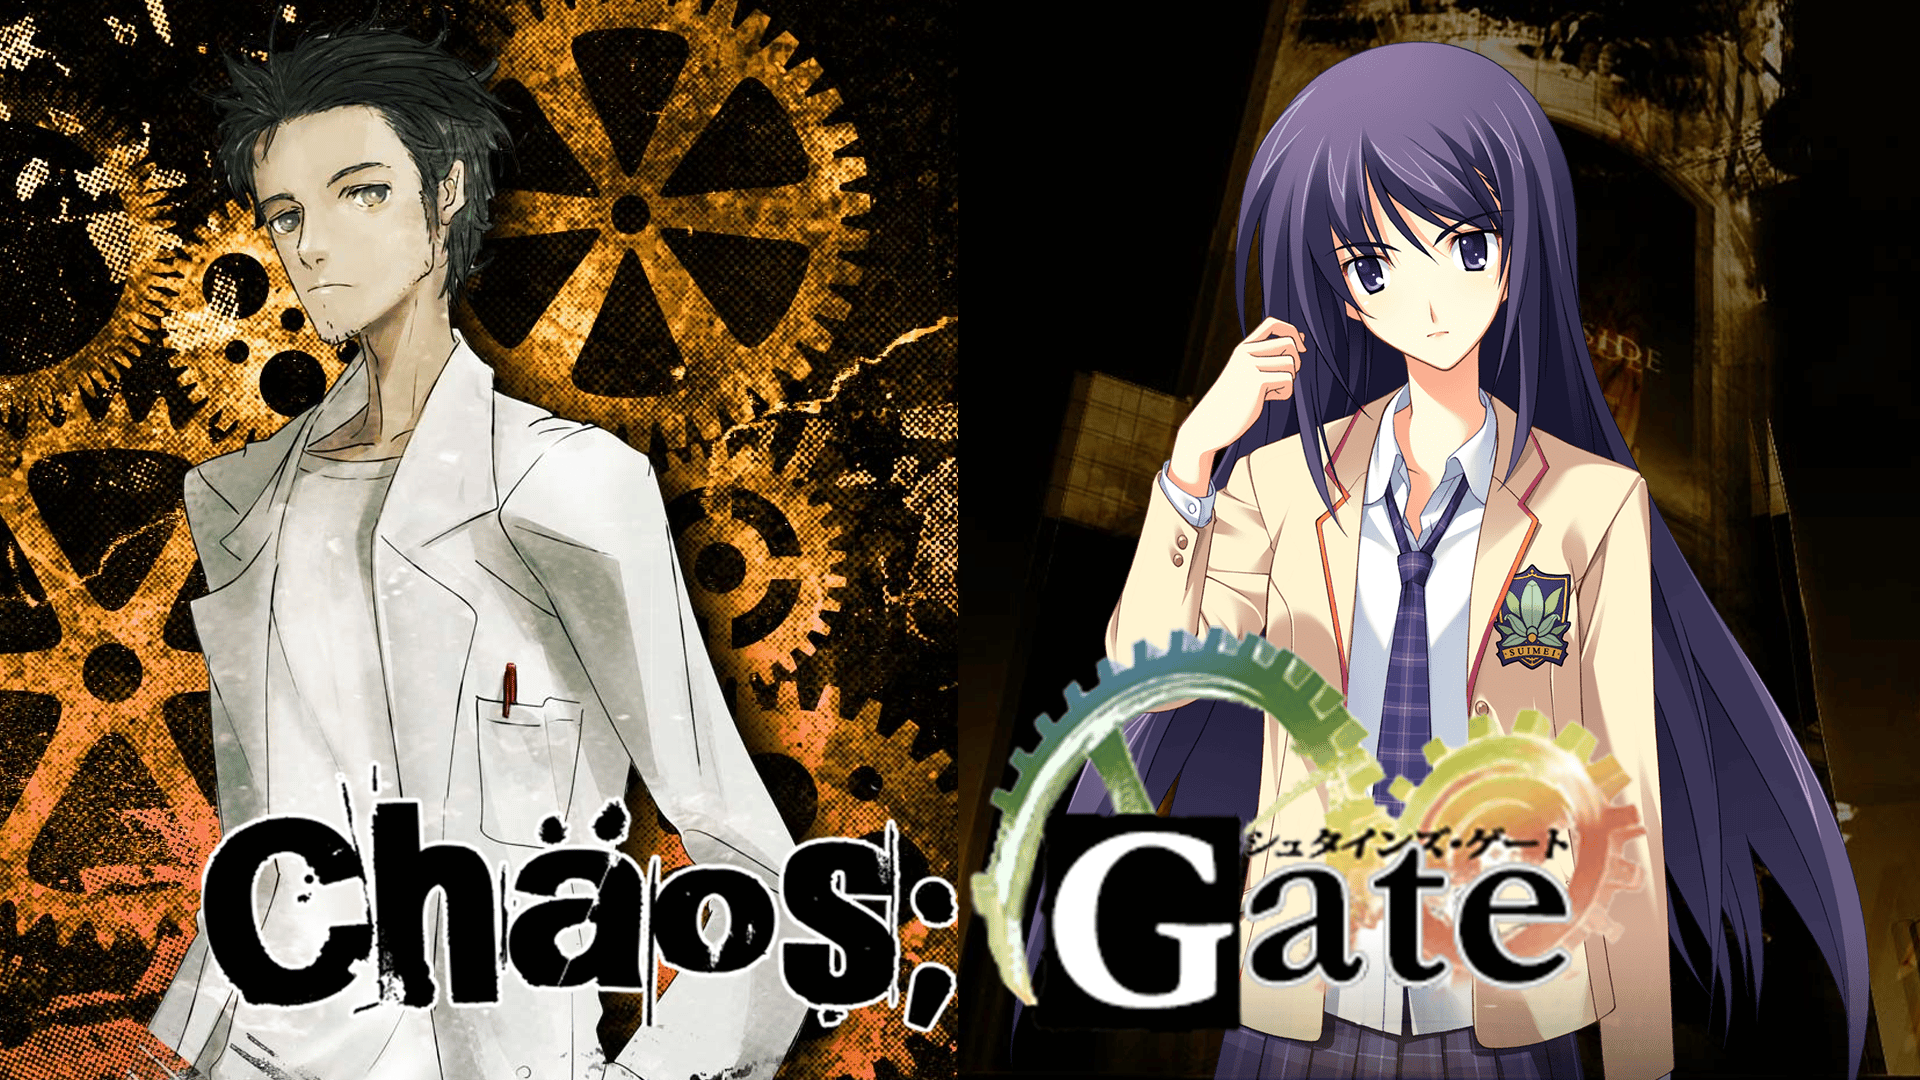 The Origins You Never Knew About Steins;Gate Protagonist Okabe Rintaro: Chaos;Gate